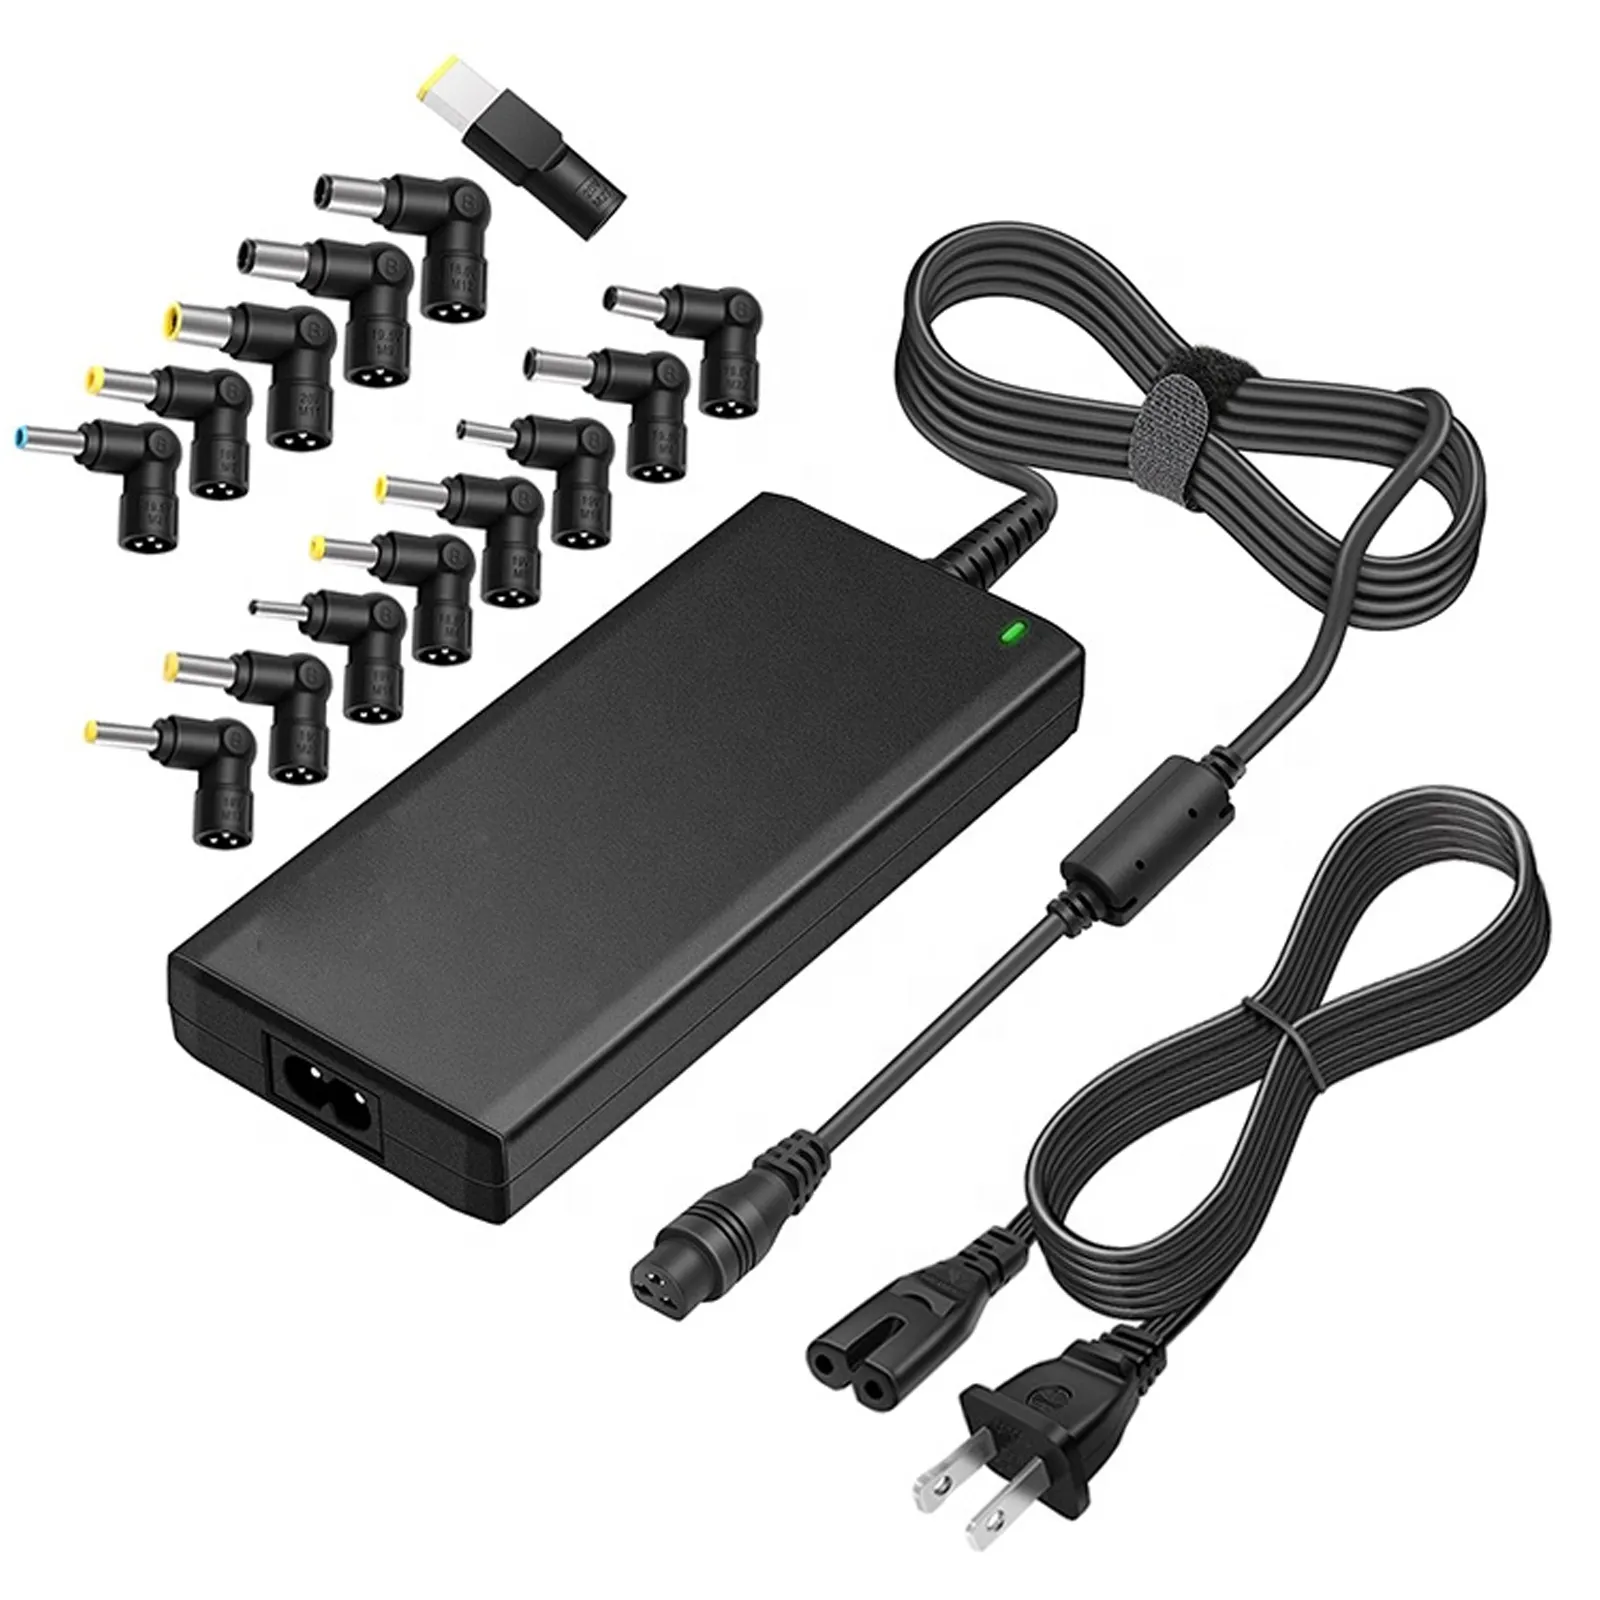 65W multi-function 15-20V Laptop charger universal charger for laptop for Asus Acer Dell HP Lenovo Huawei with 16 tips